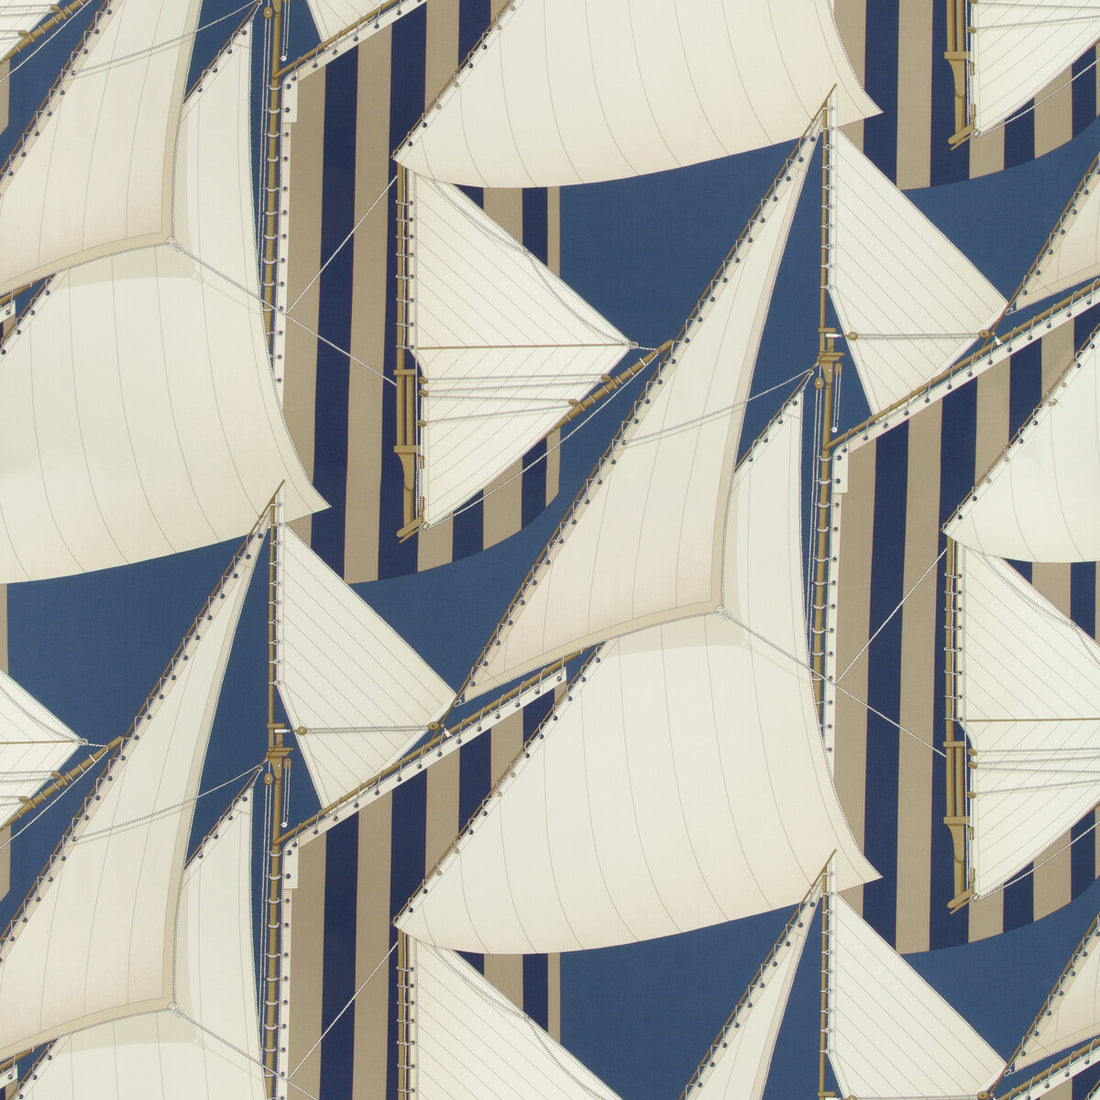 St Tropez Print fabric in navy/marine color - pattern 2018136.505.0 - by Lee Jofa in the Suzanne Kasler The Riviera collection